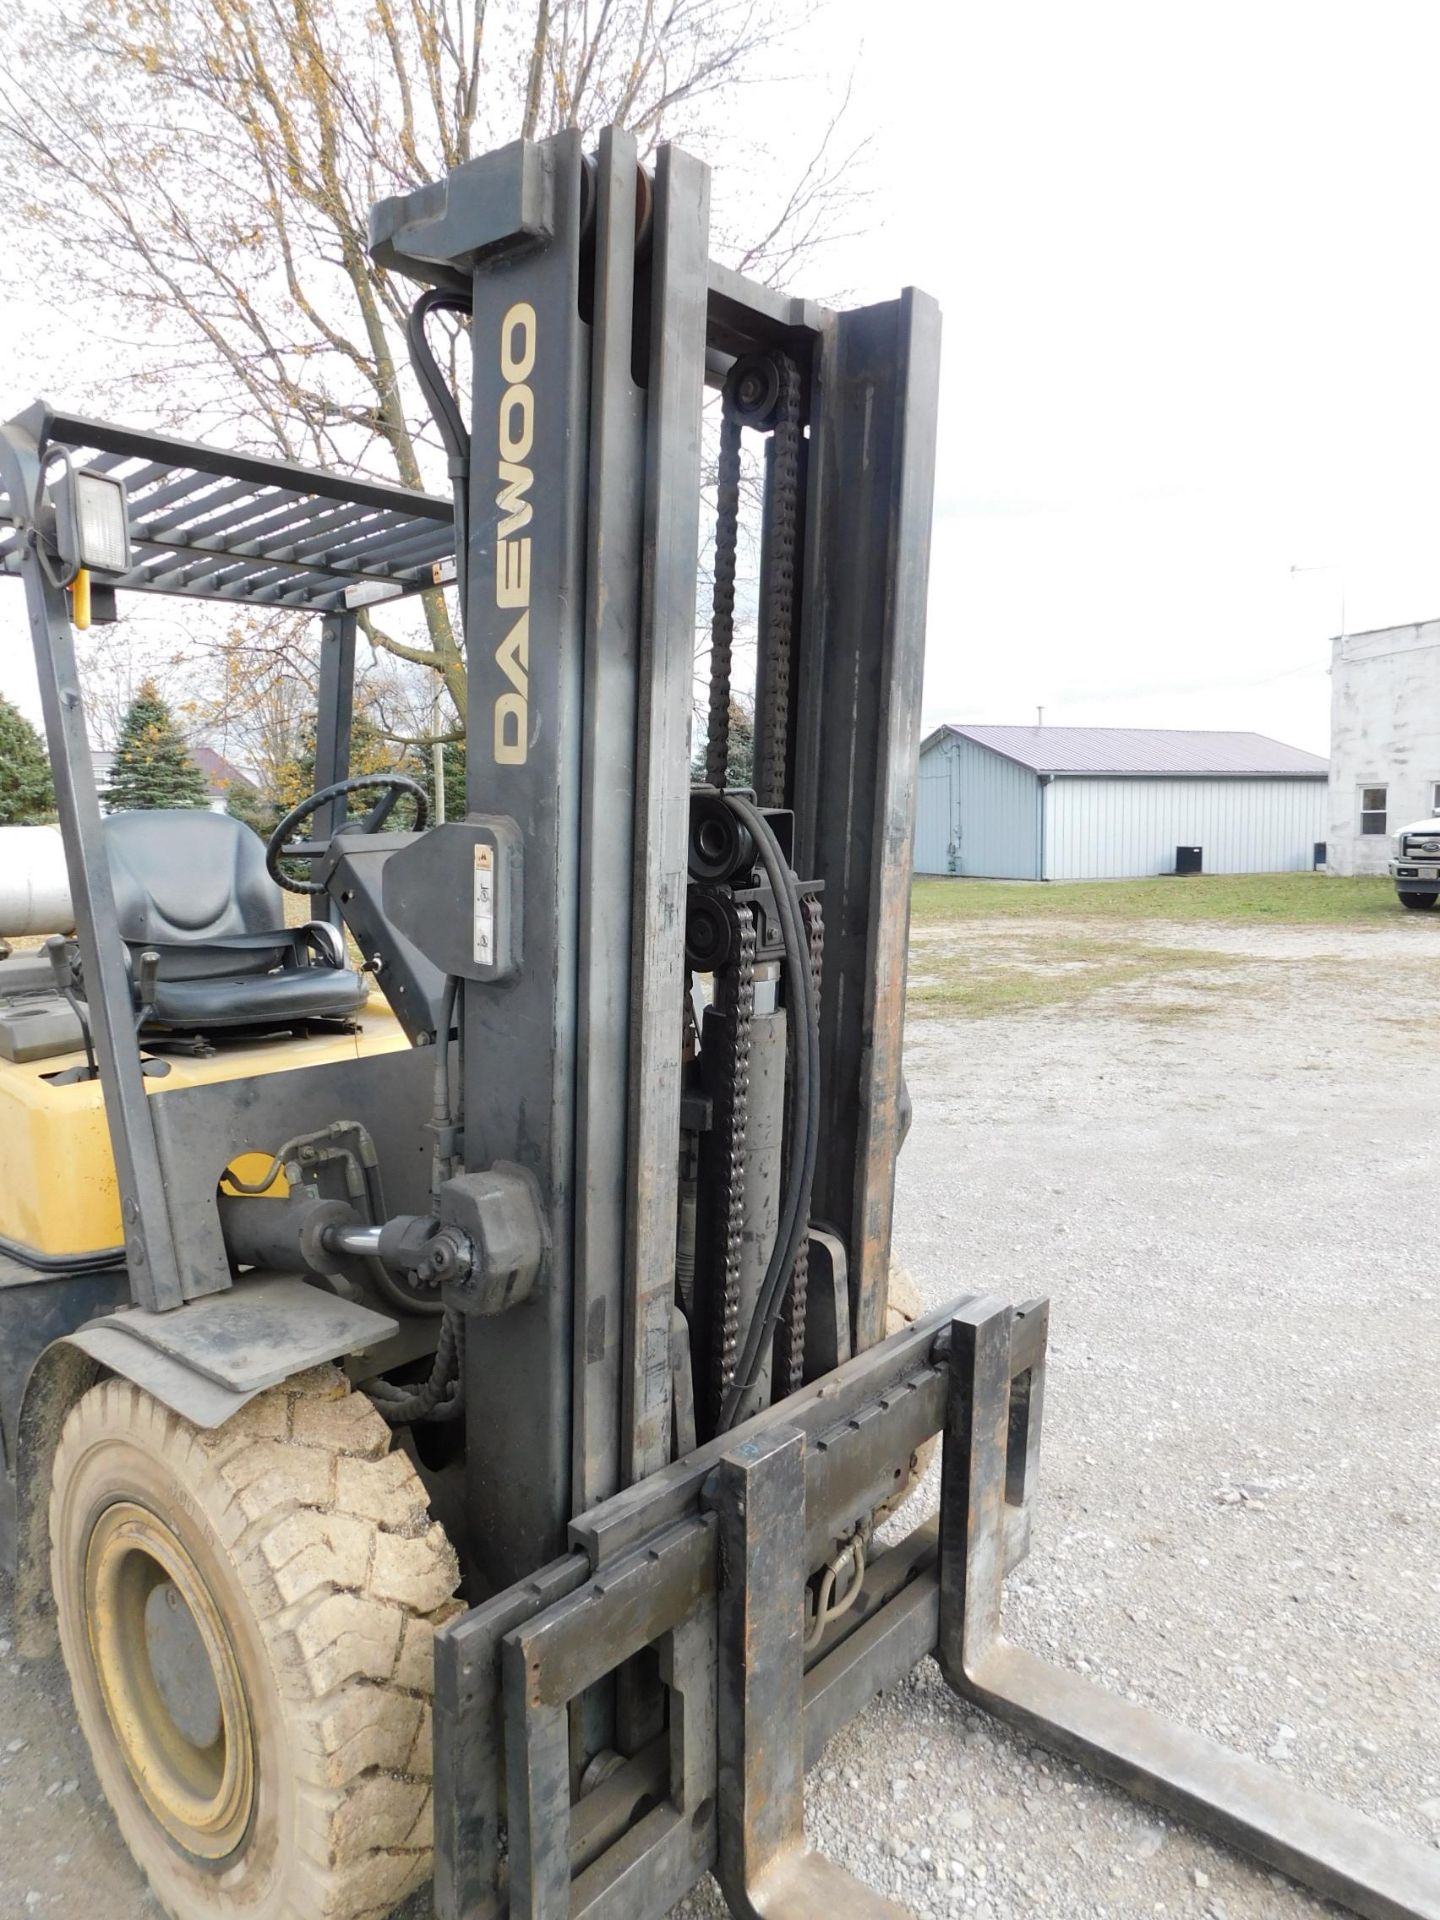 Daewoo Model G35S-2 Forklift, SN G2-00191, 6,700 lb. cap., LP, Solid Pneumatic Non-Marking Tires, - Image 11 of 20